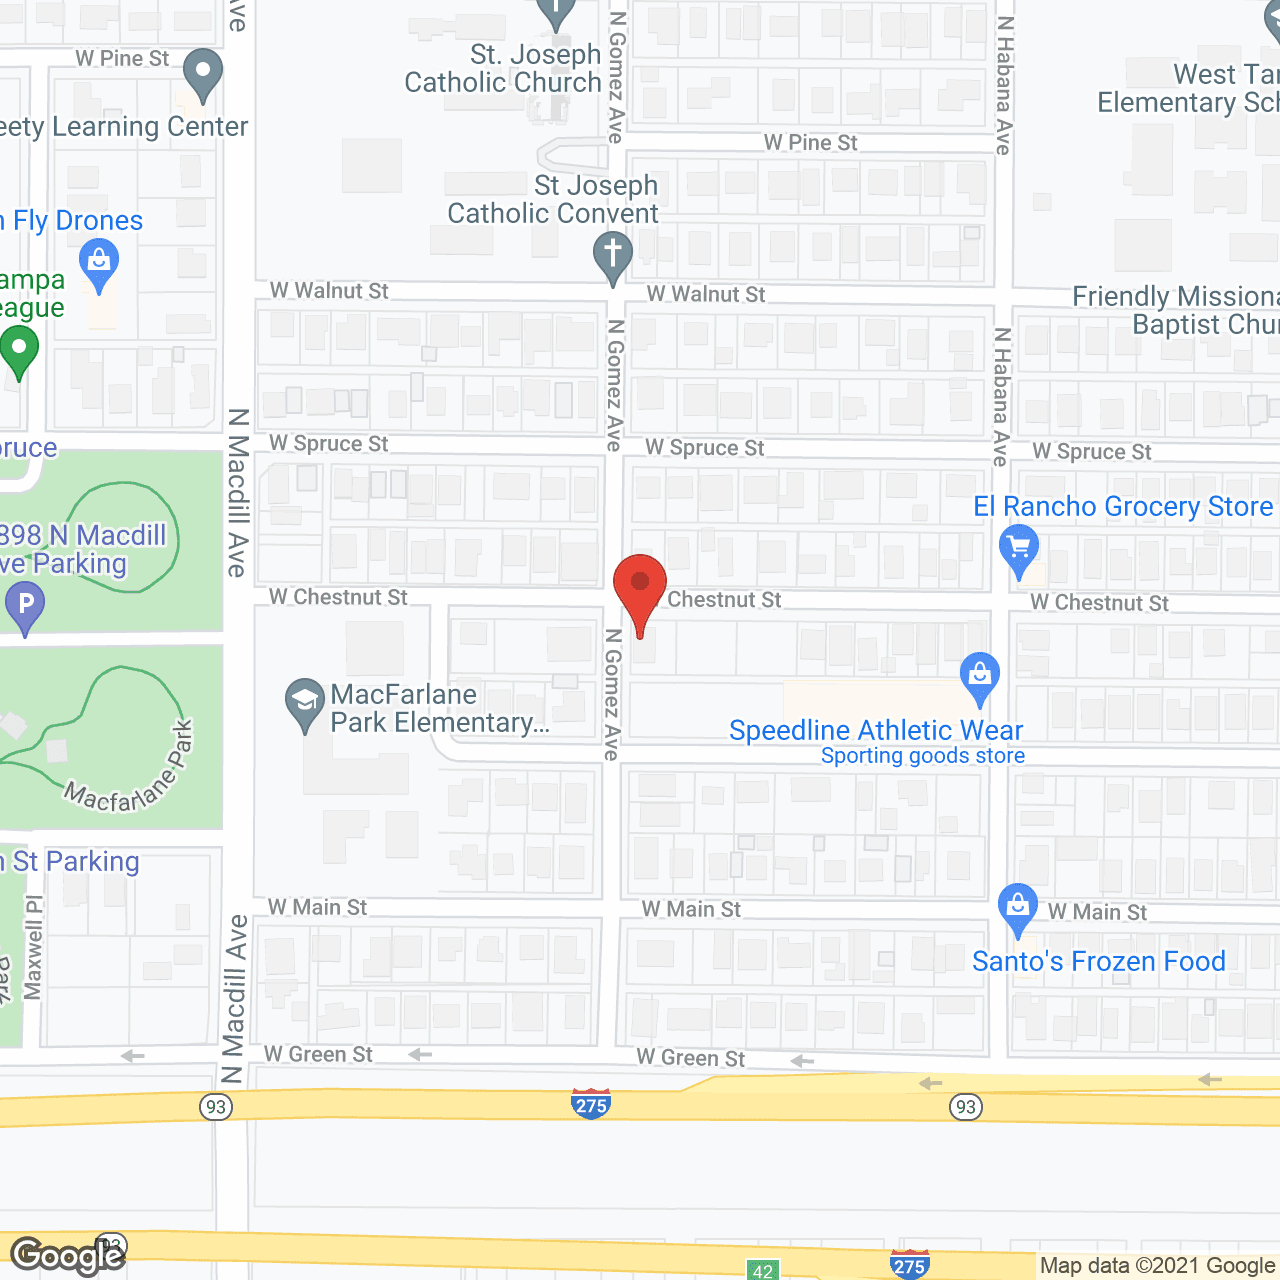 Adult Home Assisting Center in google map